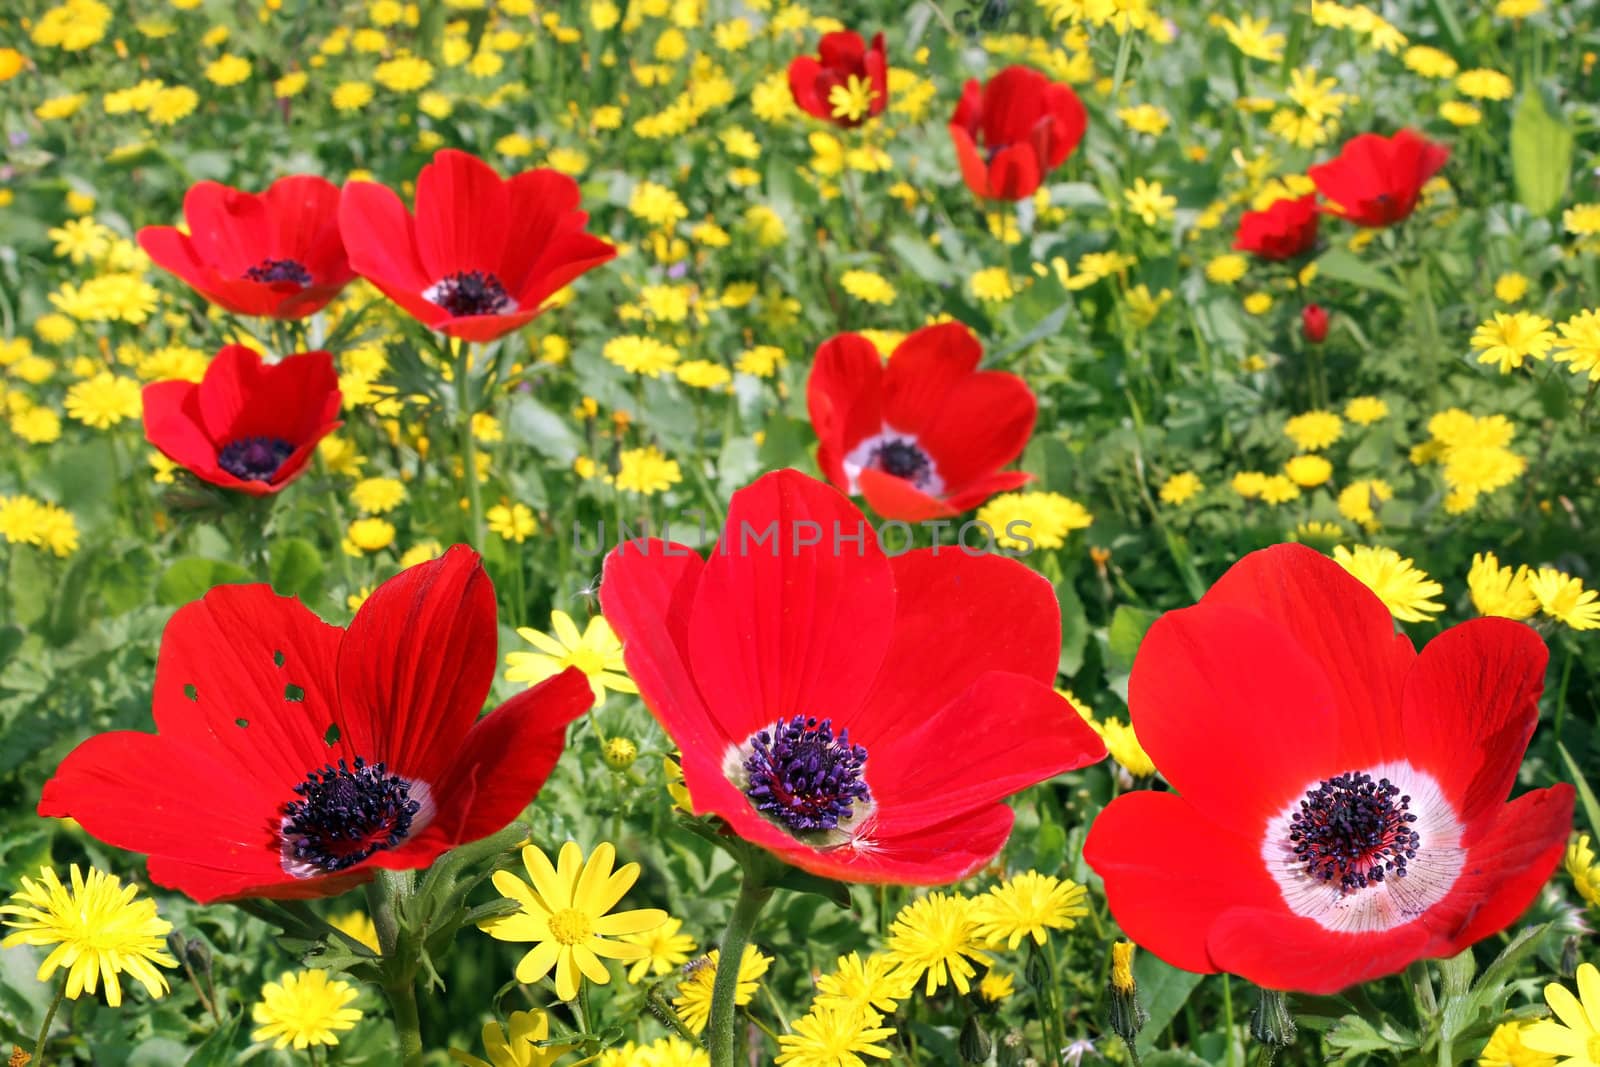 Glade of red poppies by irisphoto4